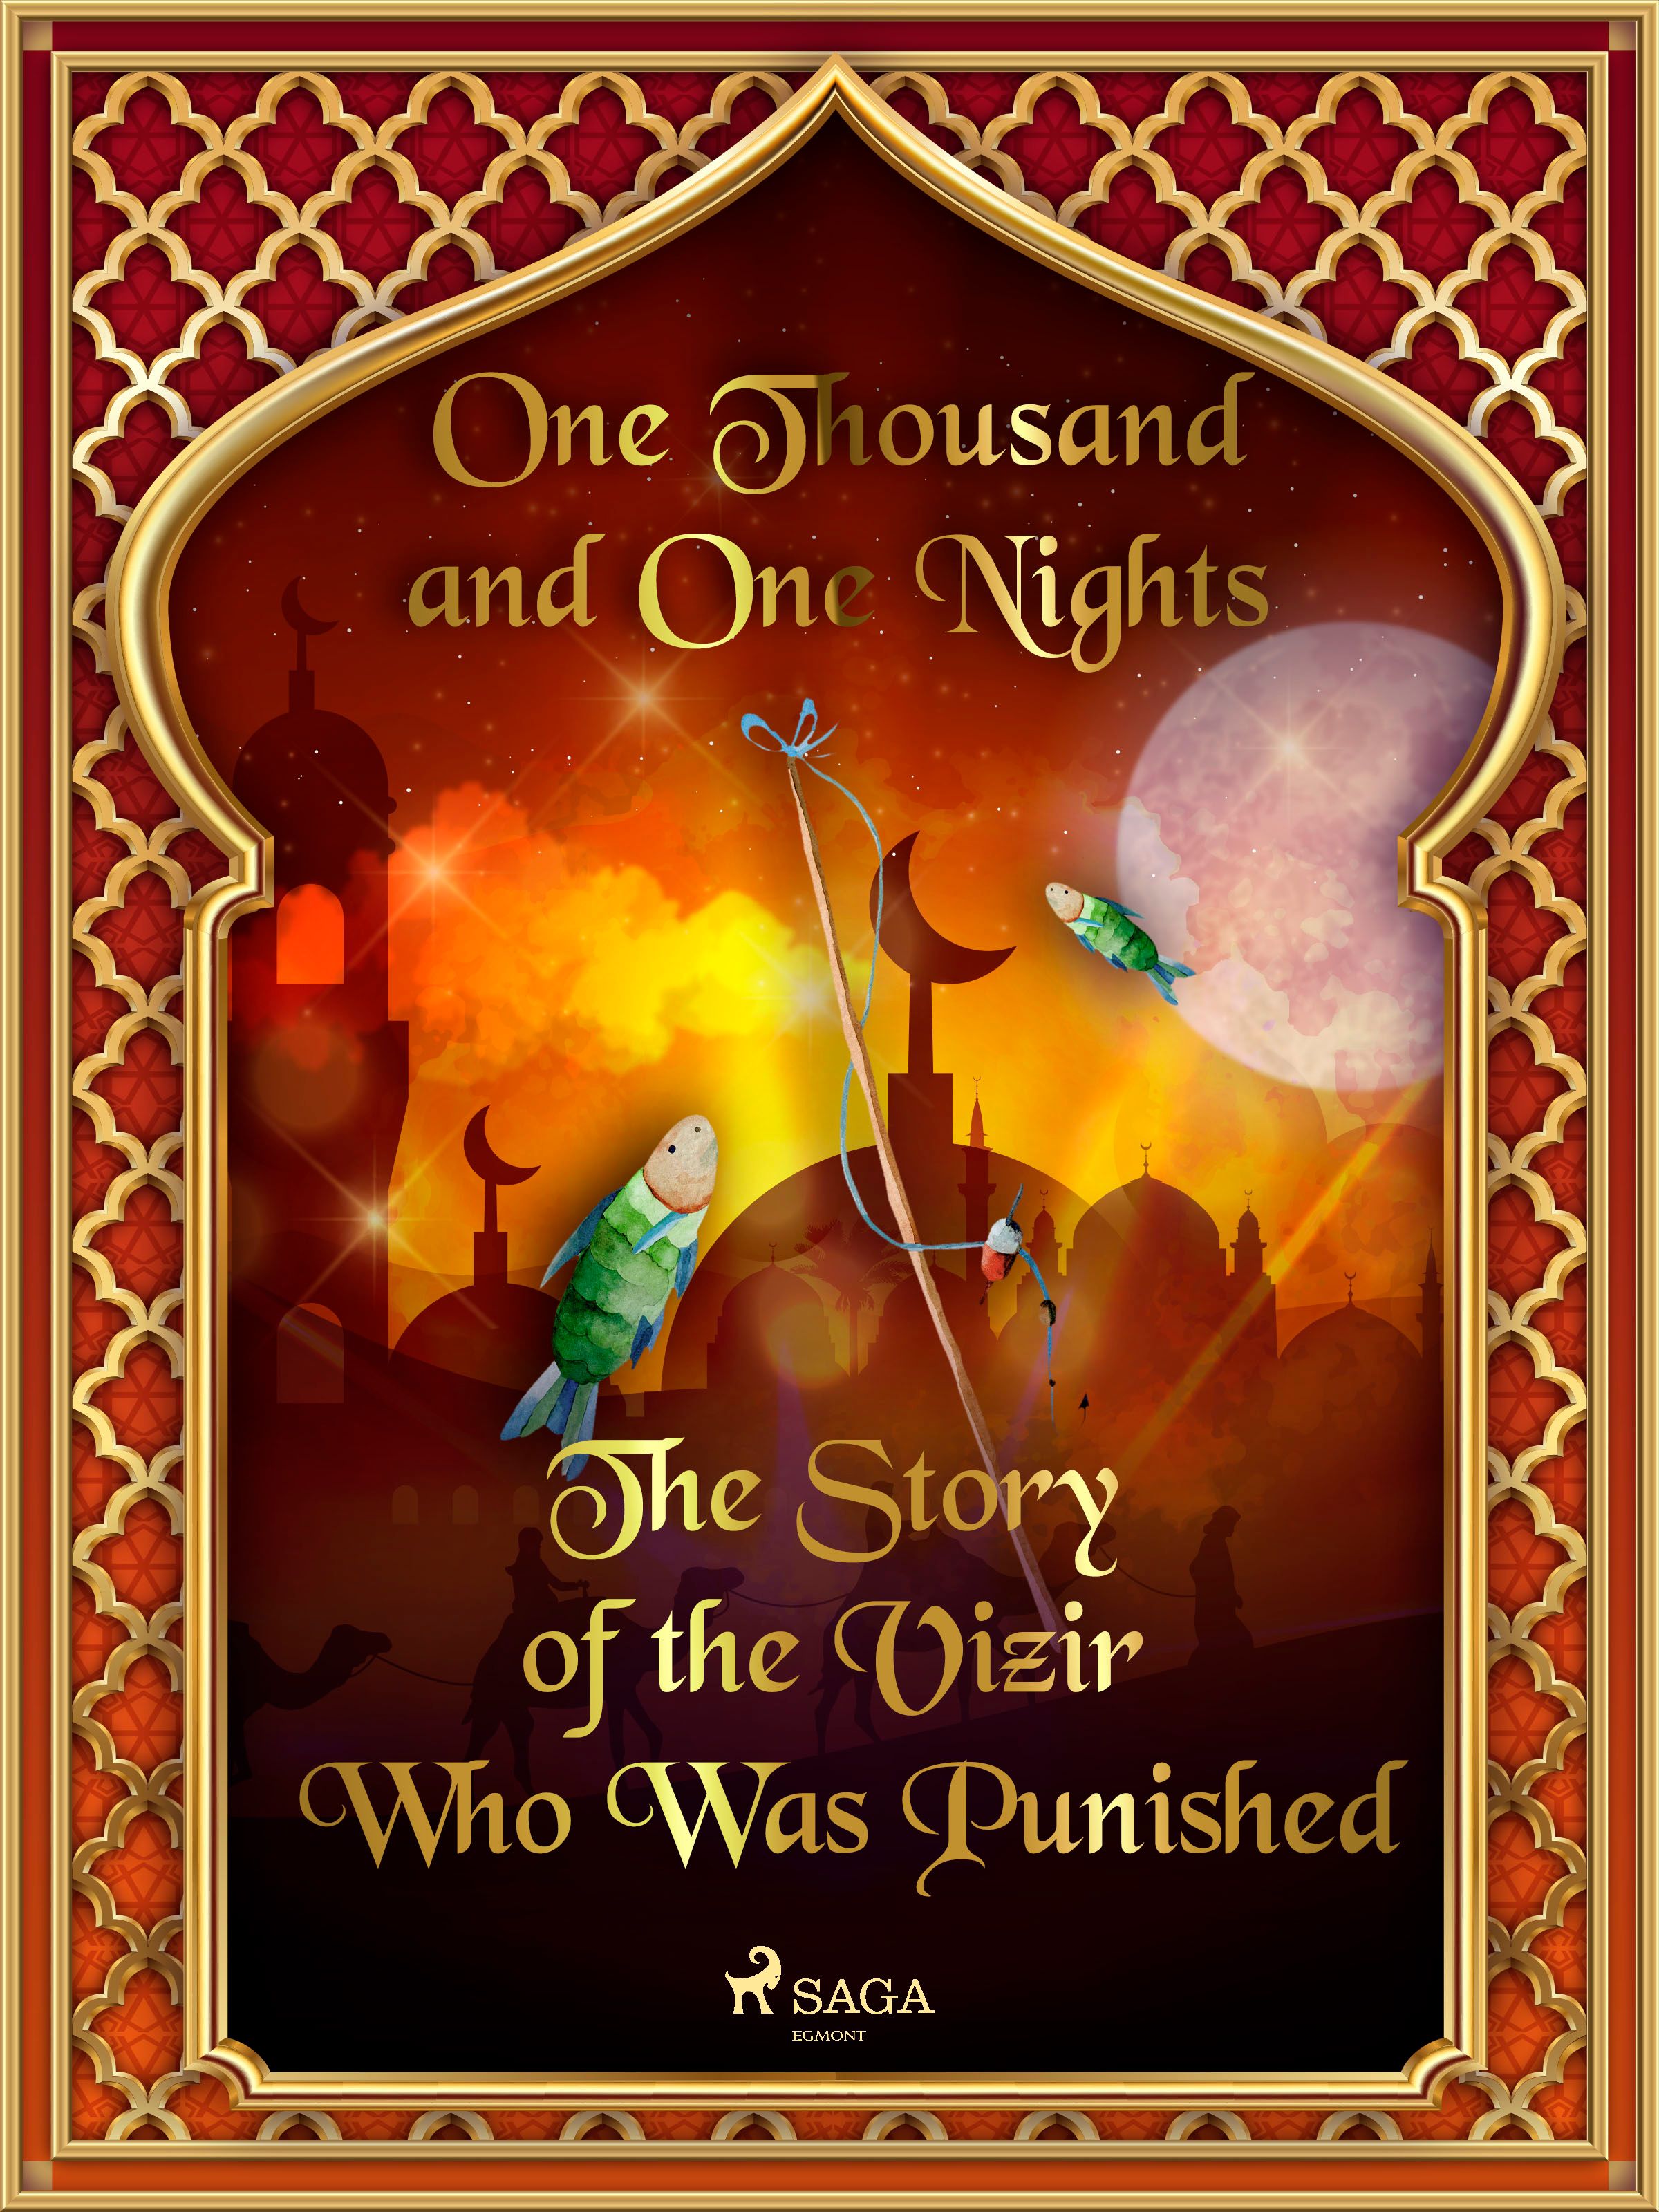 The Story of the Vizir Who Was Punished, eBook by One Thousand and One Nights